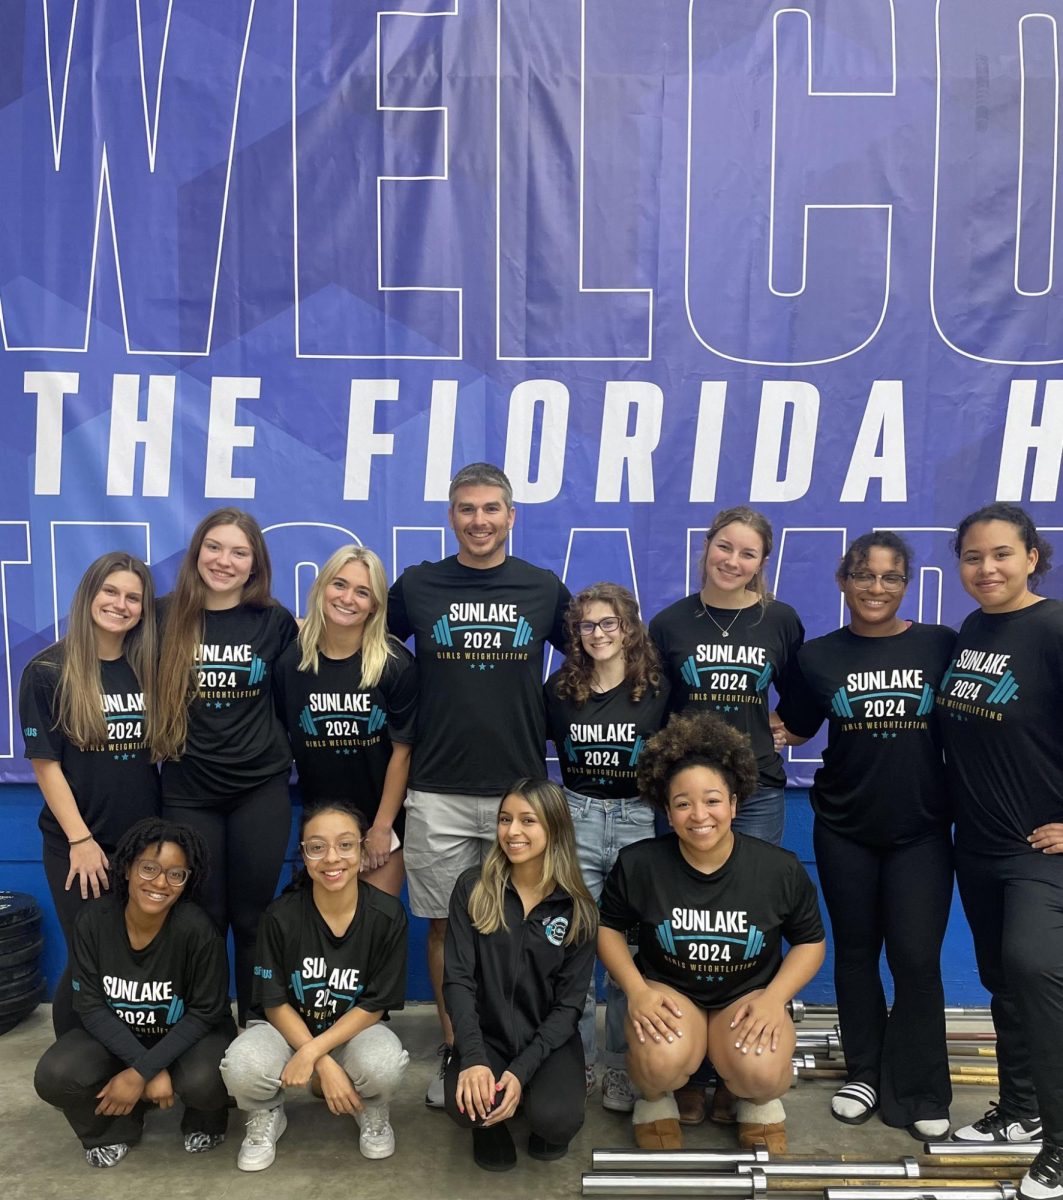 Coach+Hodros+and+the+girls+that+qualified+for+state+after+weighing+in+for+the+meet.+They+were+all+excited+to+compete+and+finish+a+great+season+of+weightlifting+off+strong.+Coach+Hodros+said%2C+...youre+going+to+have+highs+and+lows+but+overall+it+was+a+really+great+season.